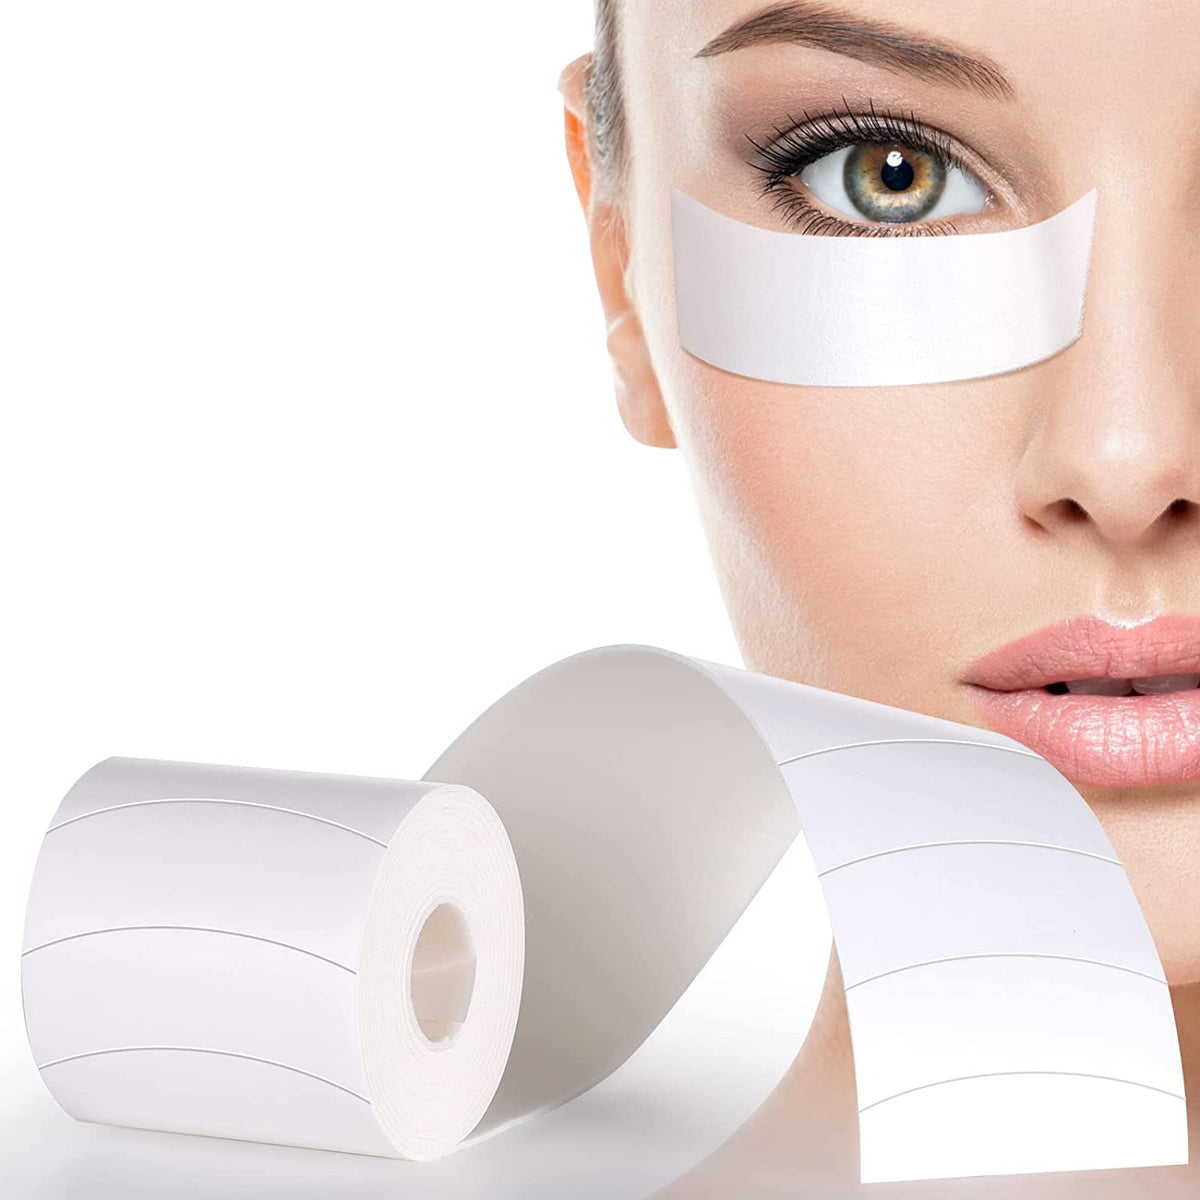 Foam Eye Pads - Makeup and Beauty Courses Online